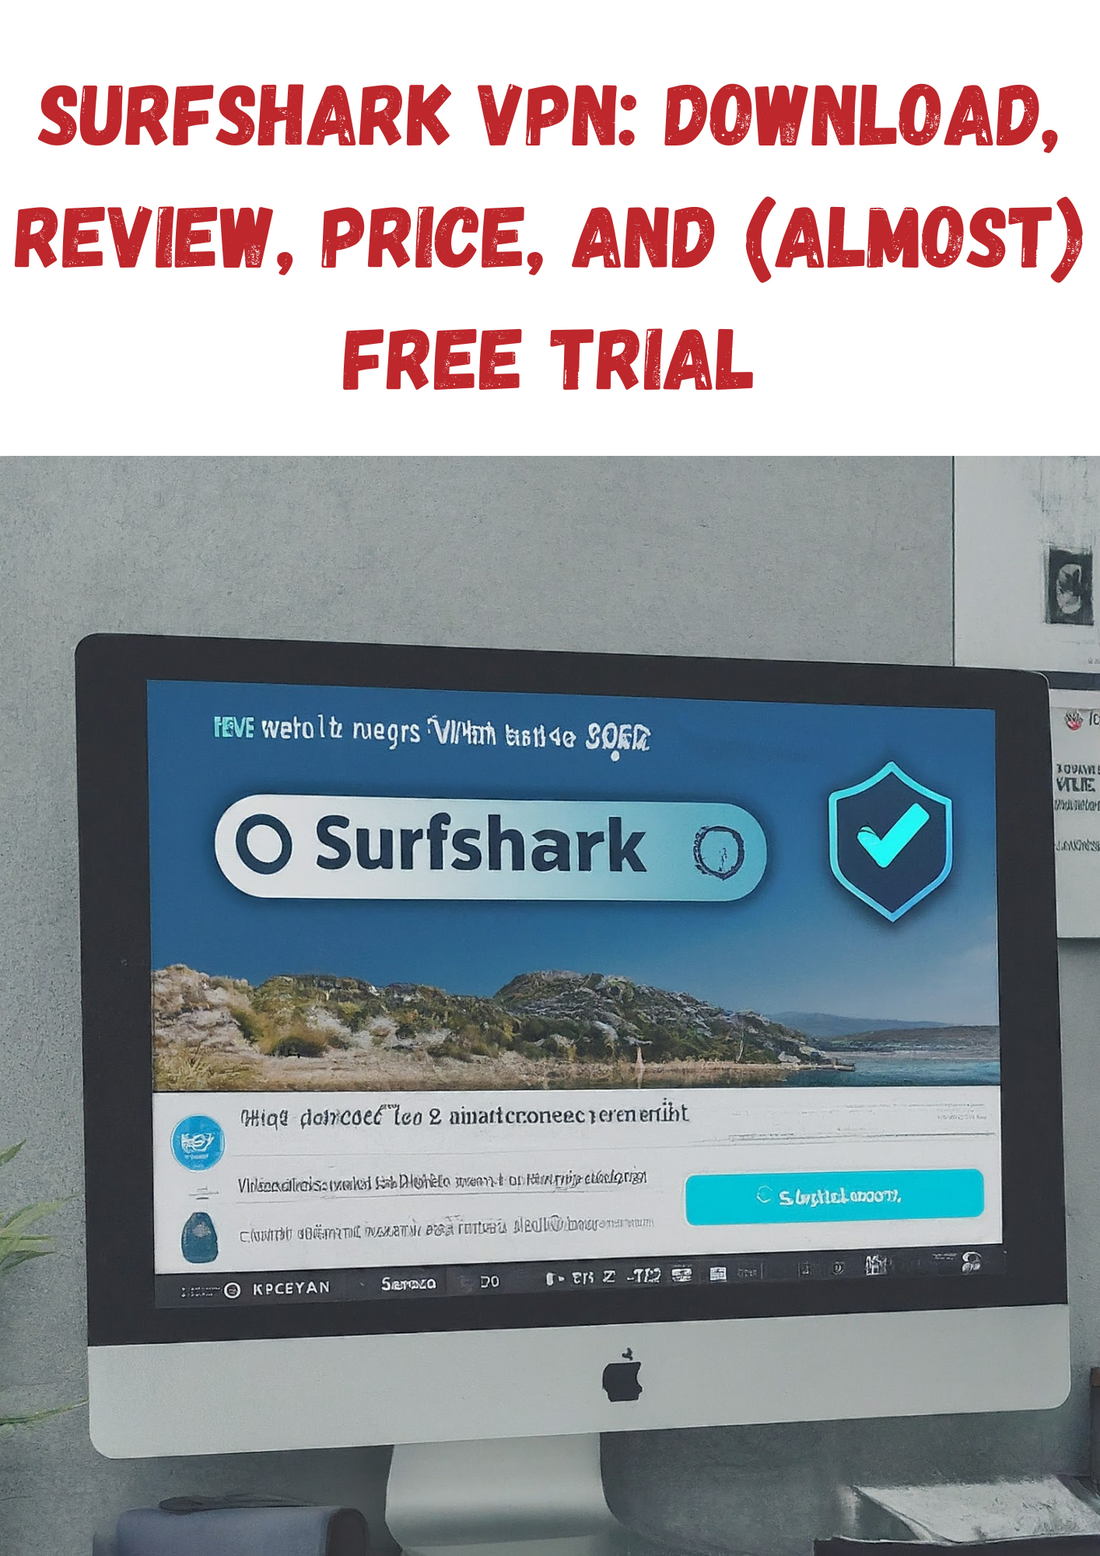 Surfshark VPN: Download, Review, Price, and (Almost) Free Trial